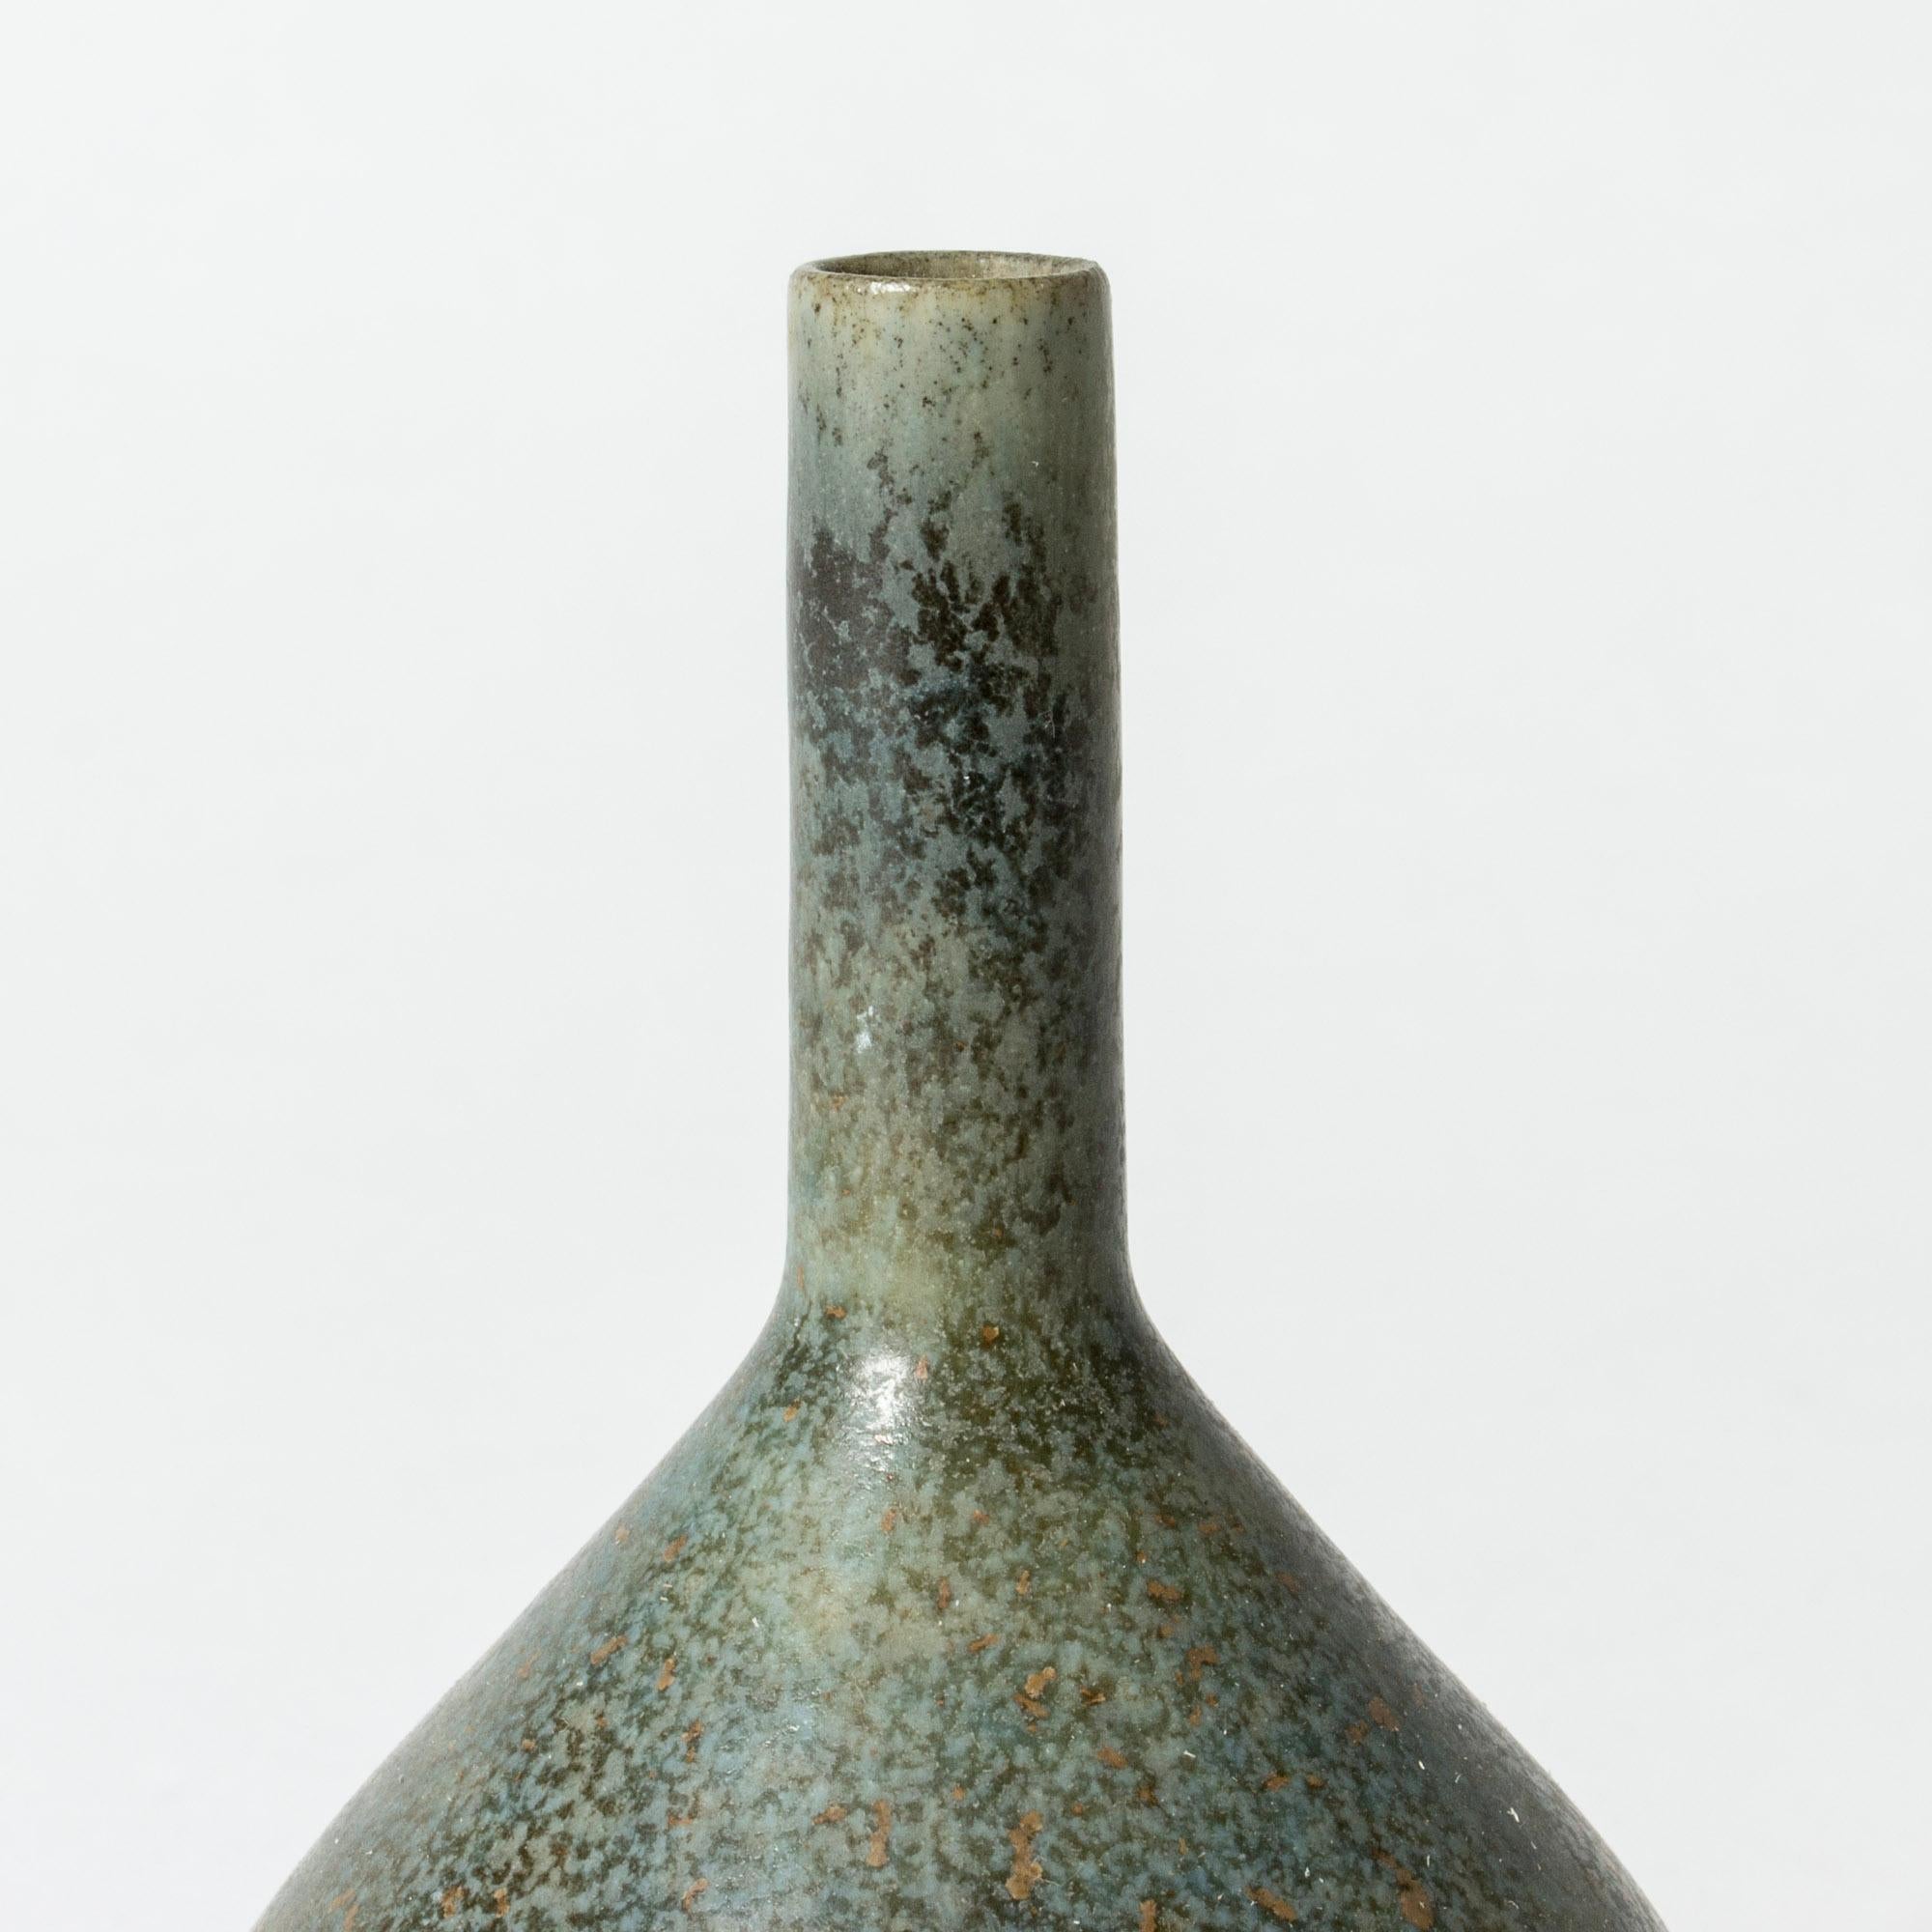 Miniature stoneware vase by Carl-Harry Stålhane with an angular plump body contrasted with a straight, slender nozzle. Beautiful greyish blue glaze.

Carl-Harry Stålhane was one of the stars among Swedish ceramic artists during the 1950s, 1960s